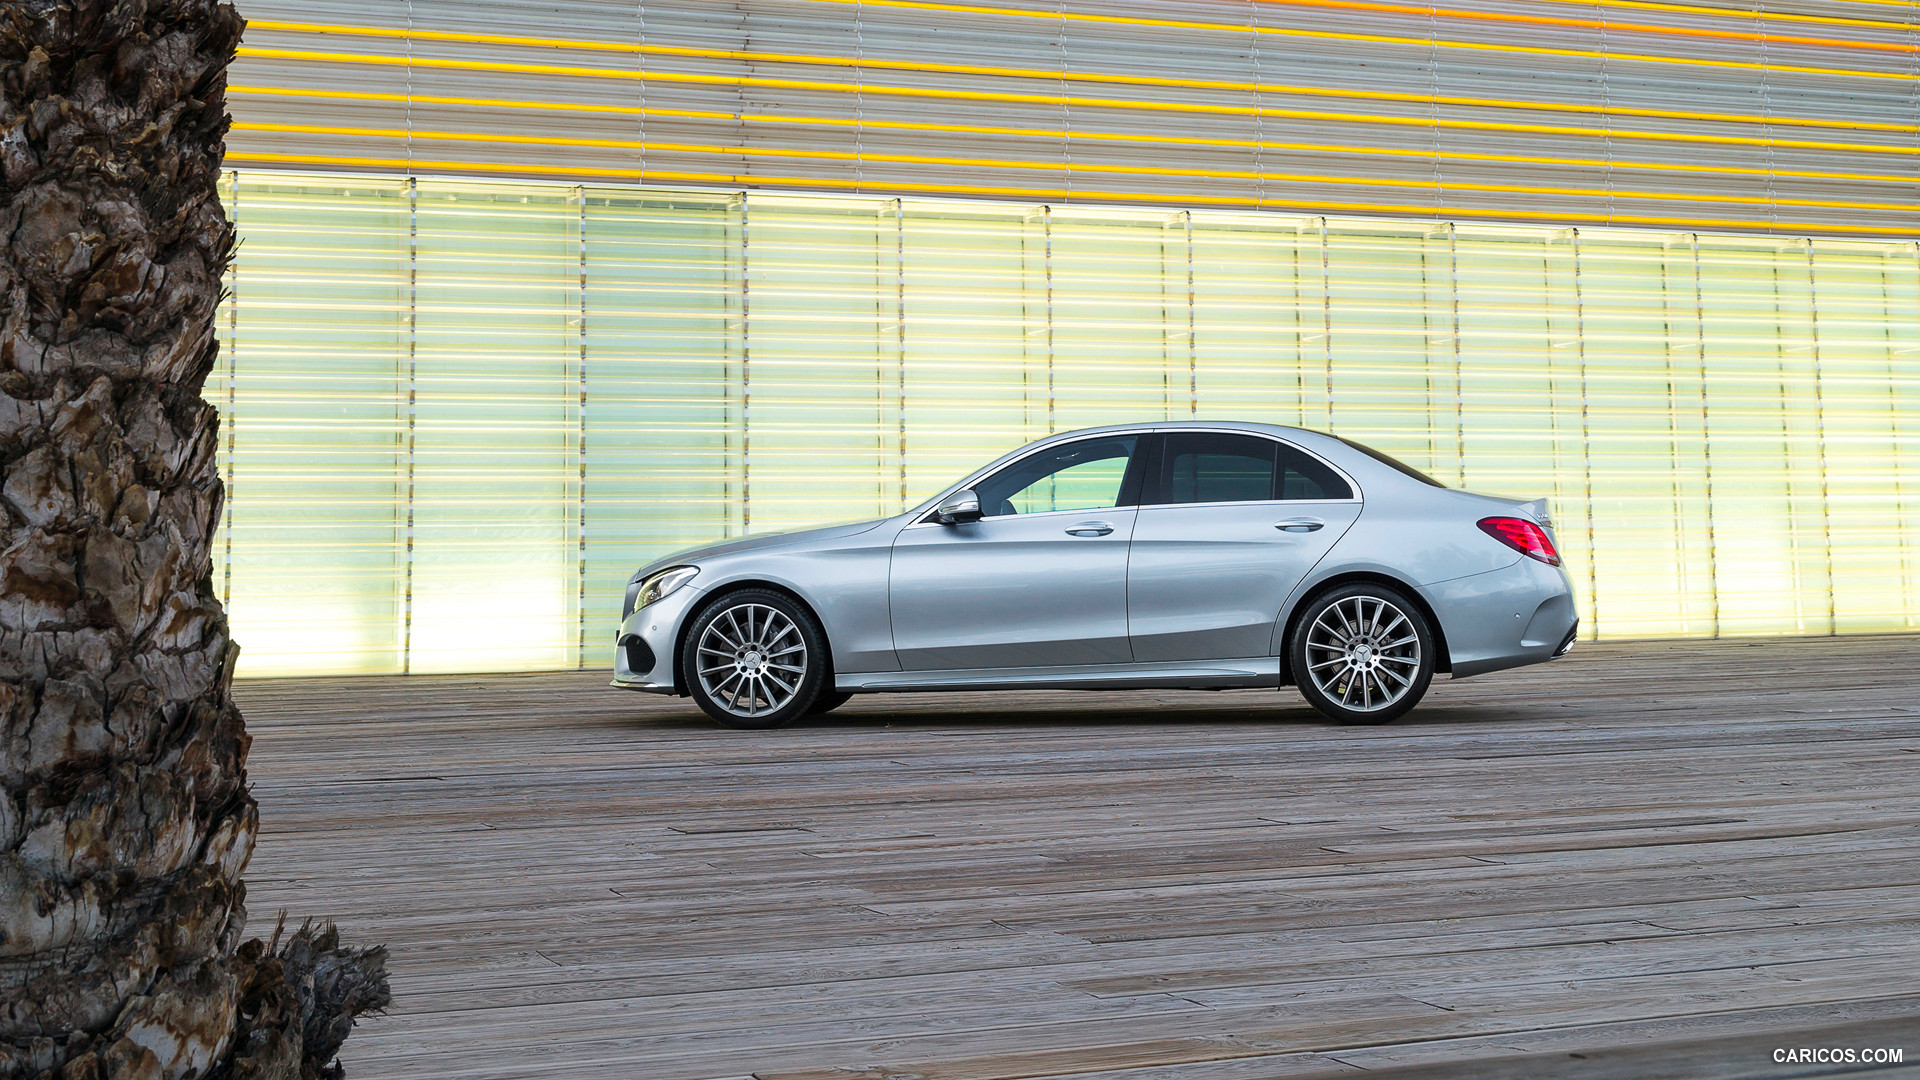 2015 Mercedes-Benz C-Class C250 (AMG Line) - Side, #165 of 181